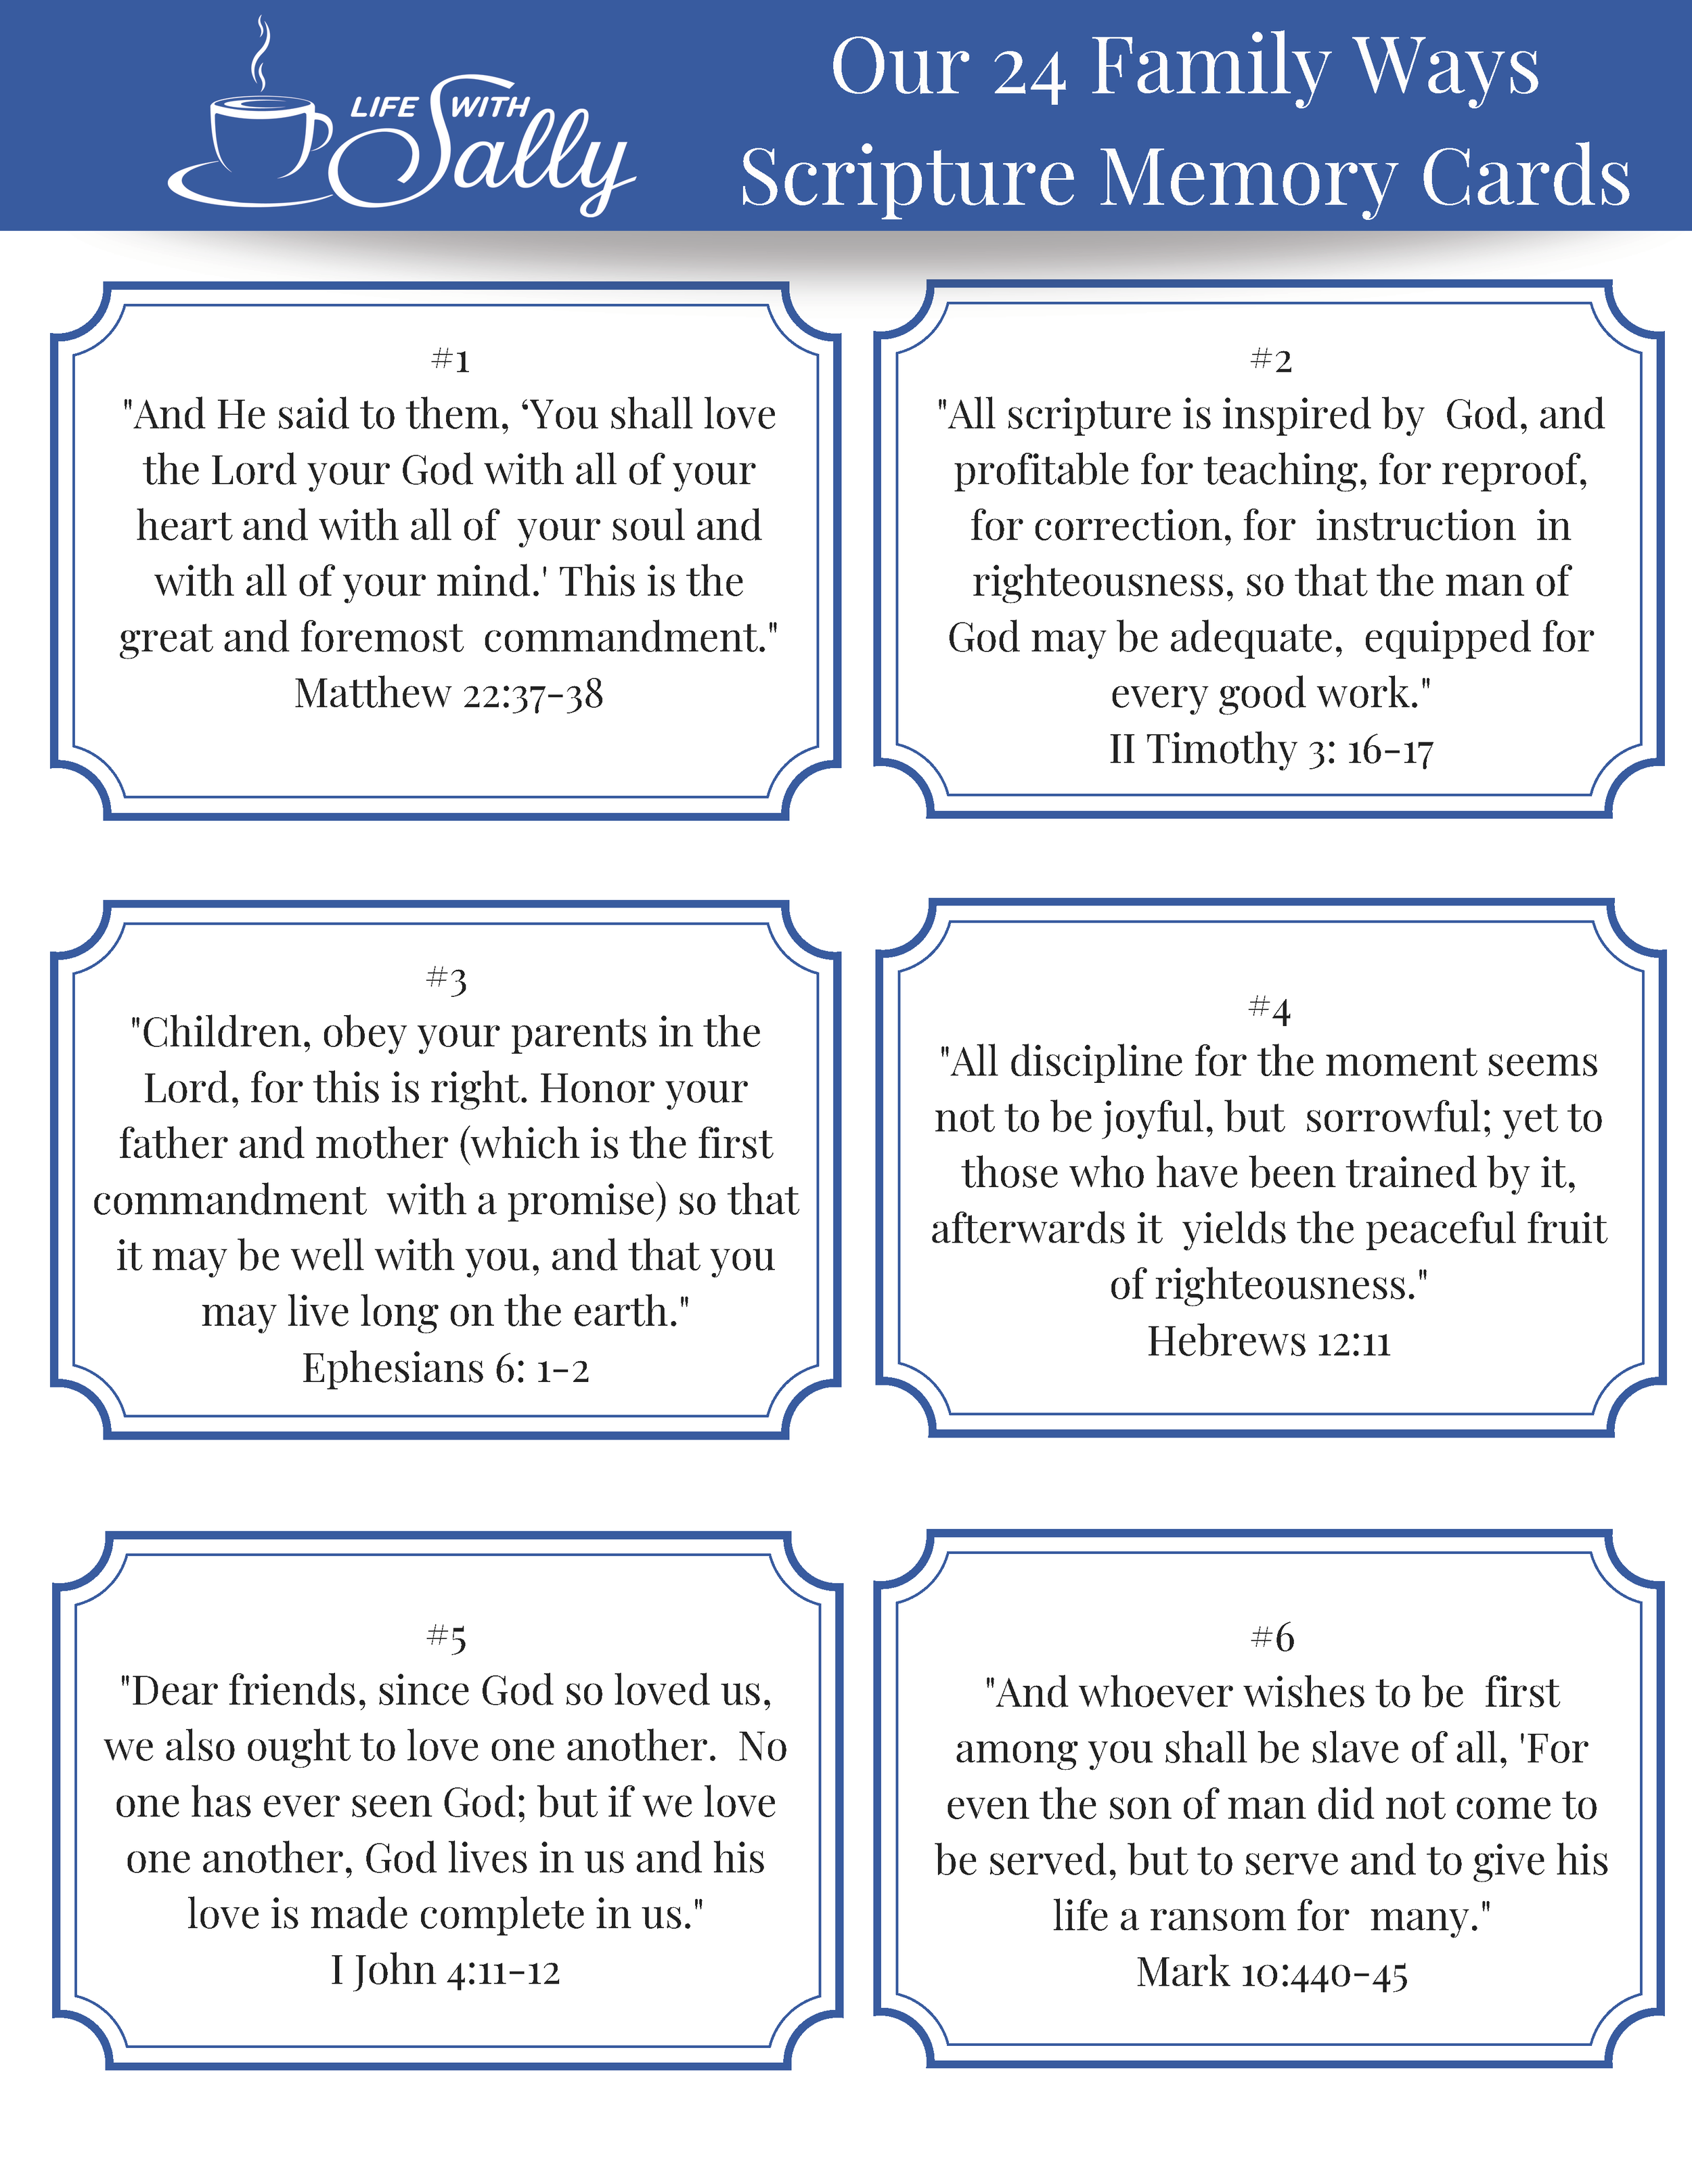 LWS+24+Ways+Verses+(4)_Page_1.png